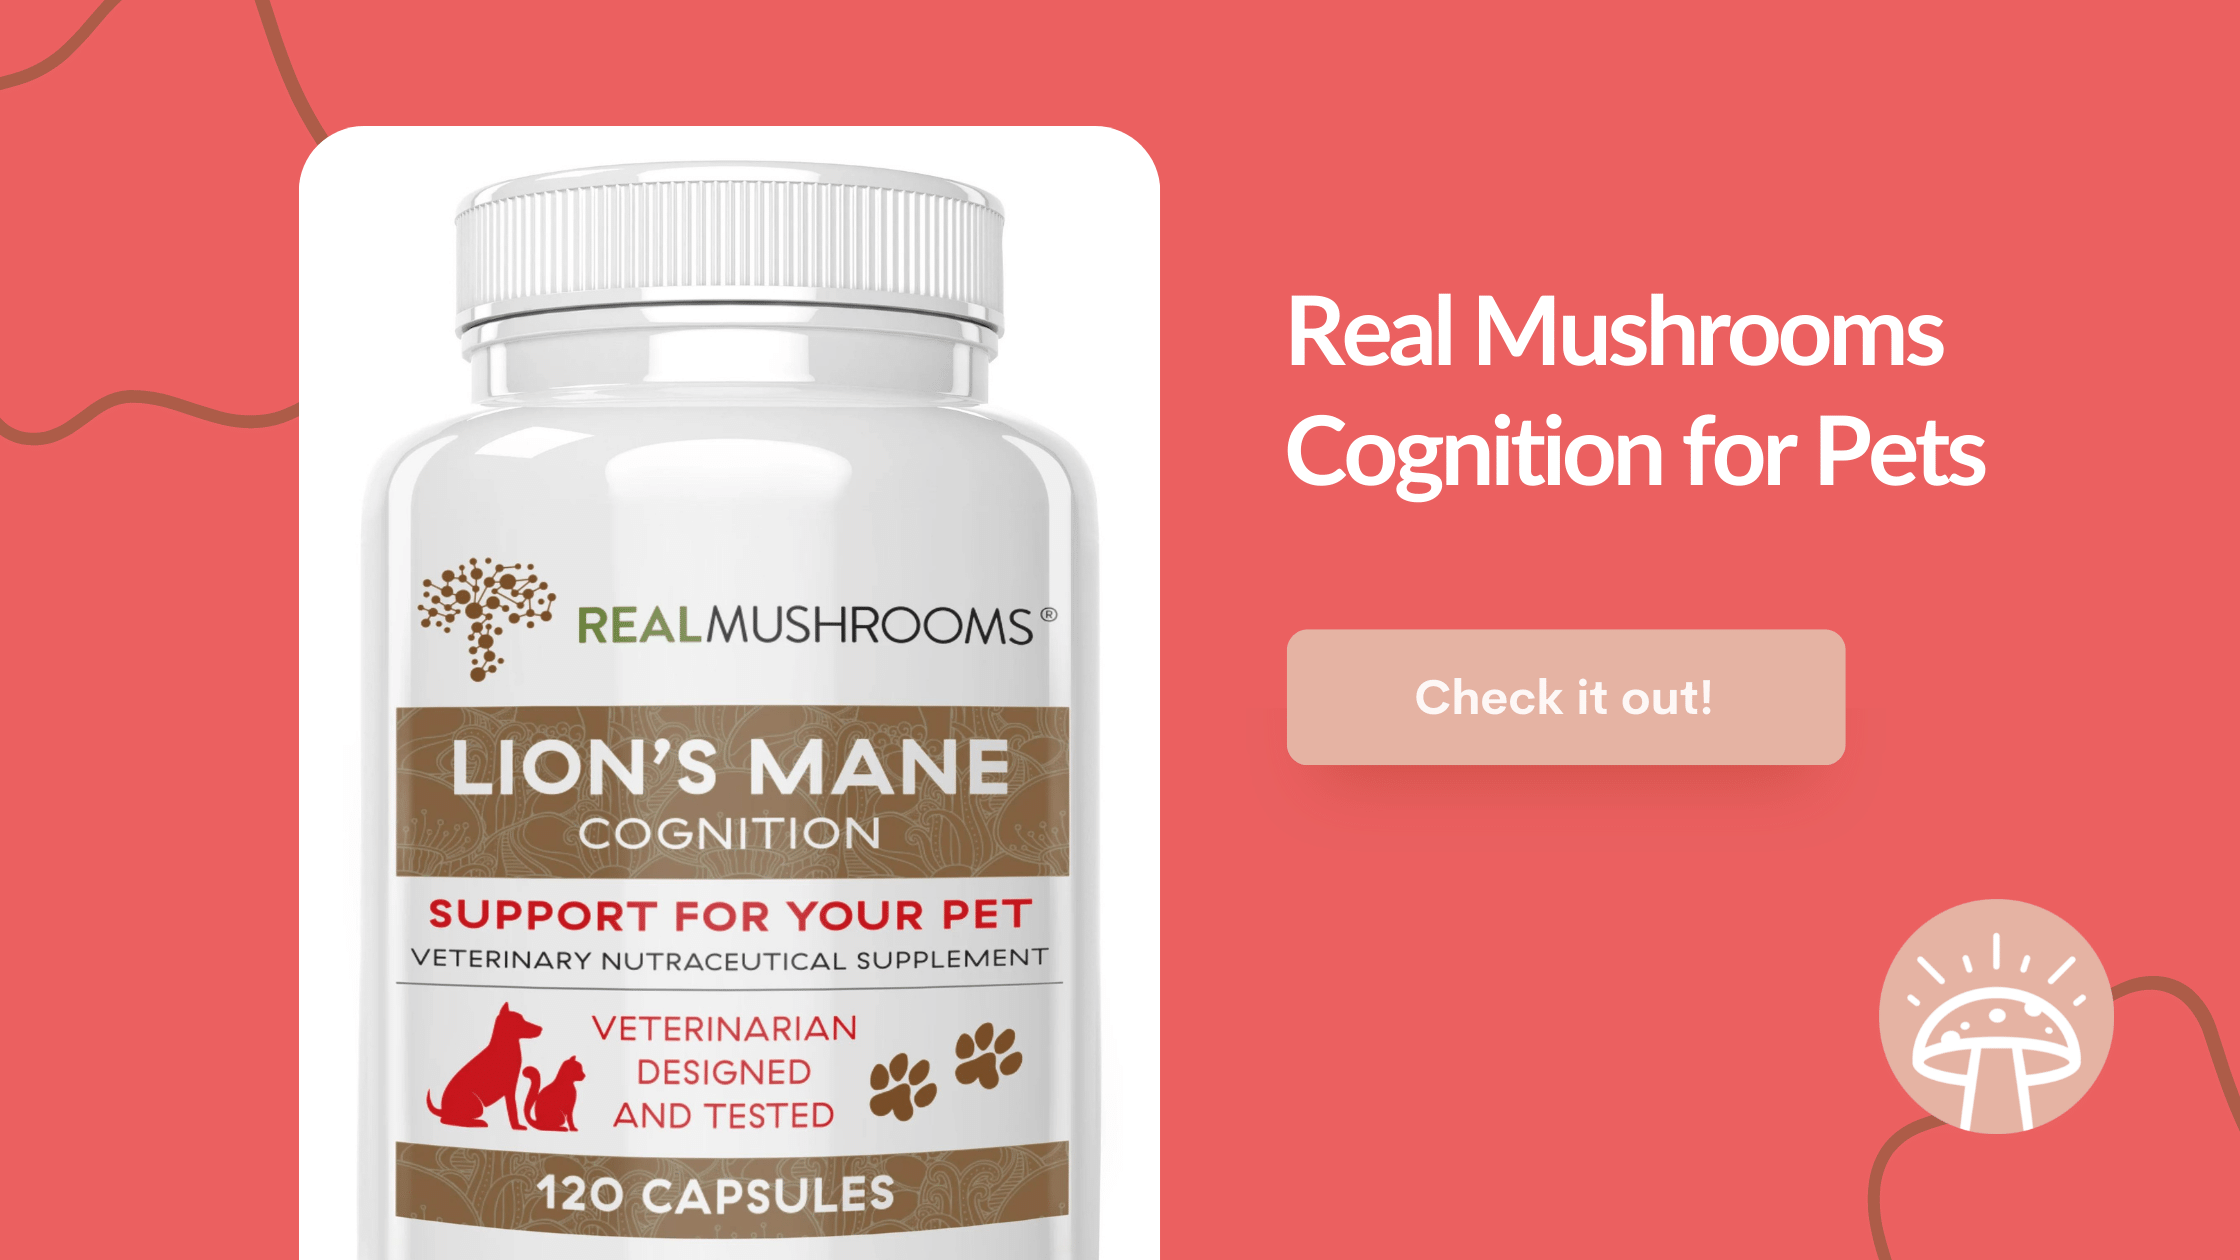 Real Mushrooms Lions Manehttps://shop.realmushrooms.com/products/organic-lions-mane-extract-capsules-for-pets?remeday